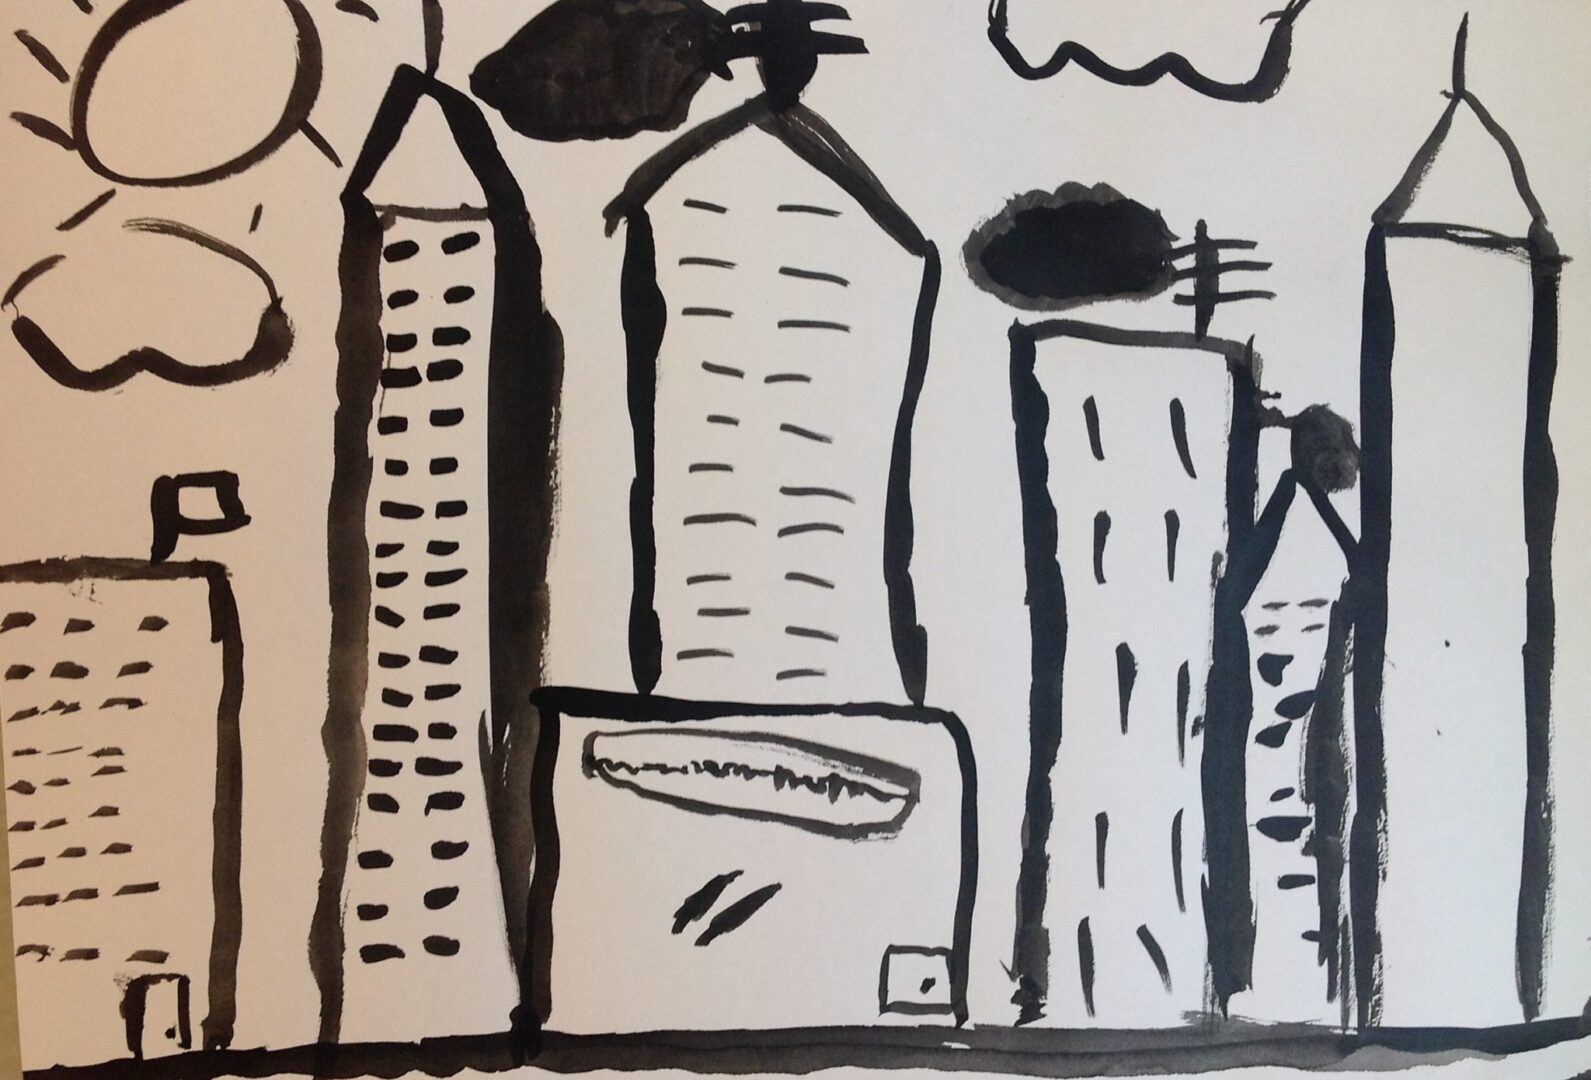 A black and white drawing of a city skyline.